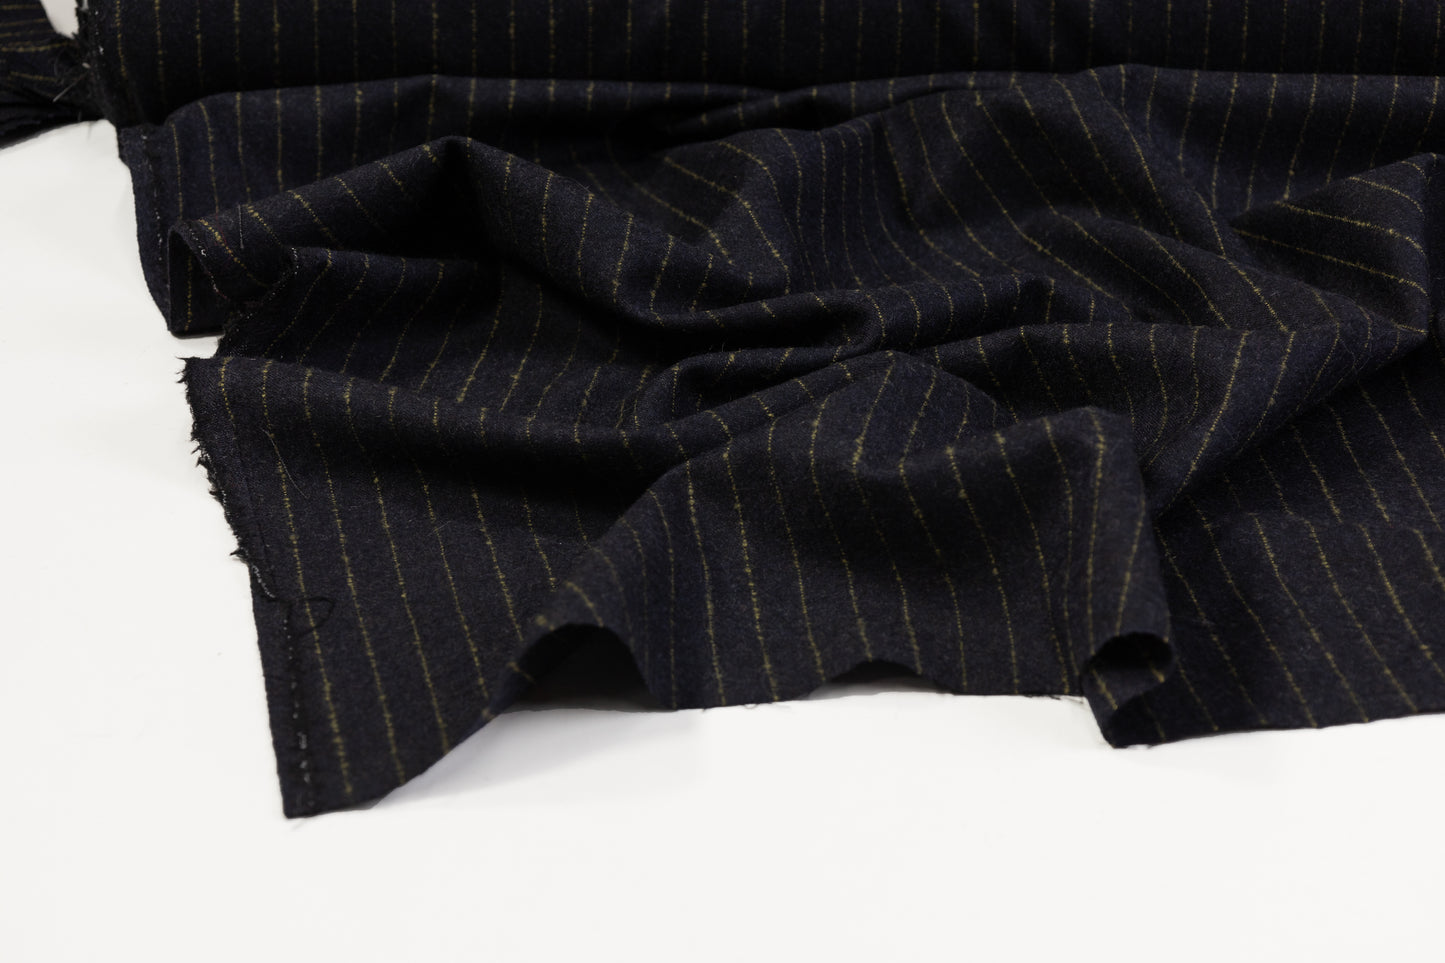 Striped Italian Wool Flannel Suiting - Navy / Lime Green